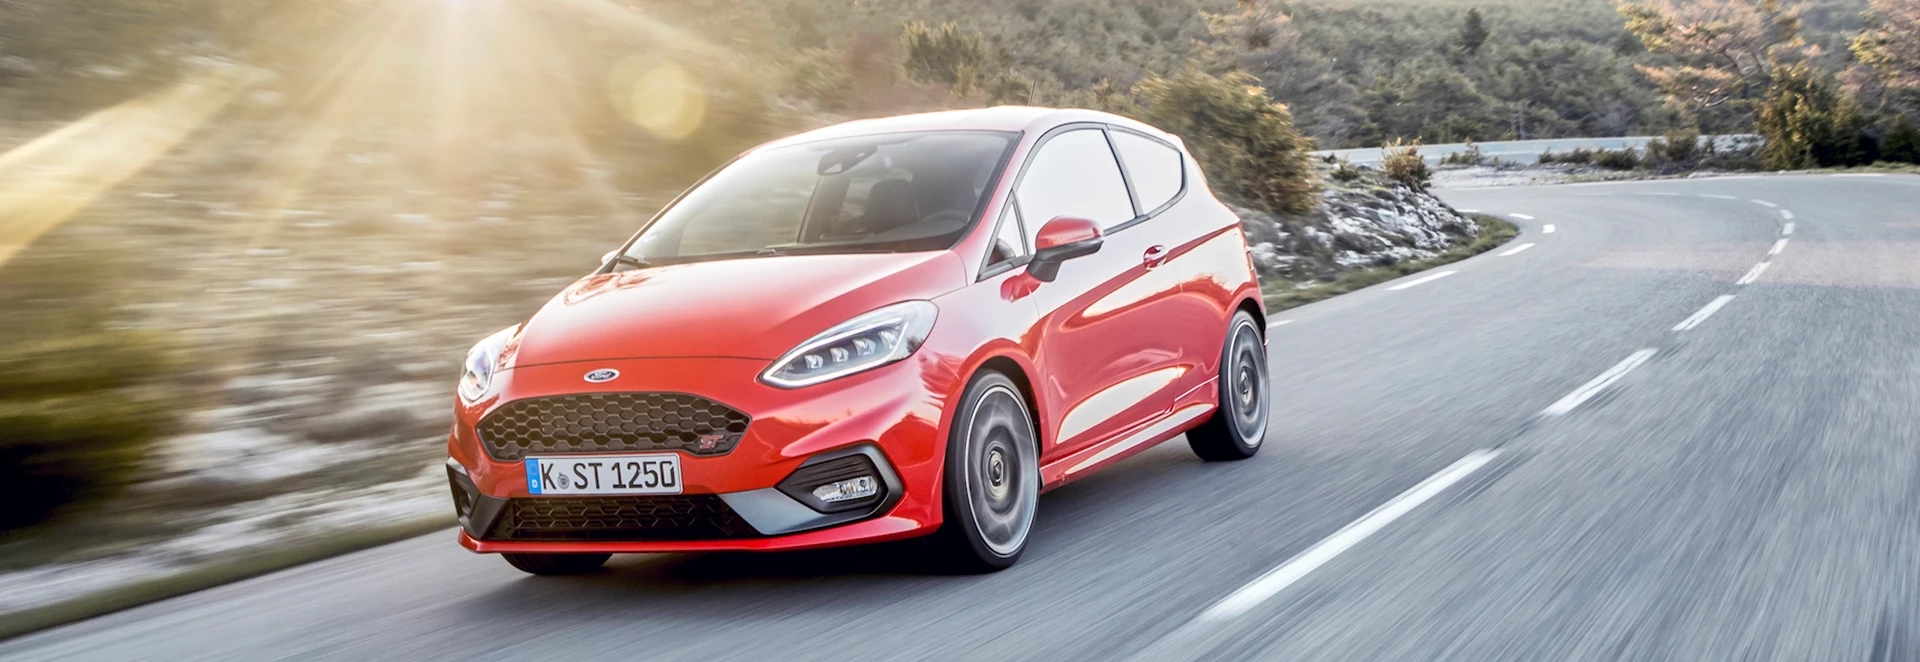 2018 Ford Fiesta ST review